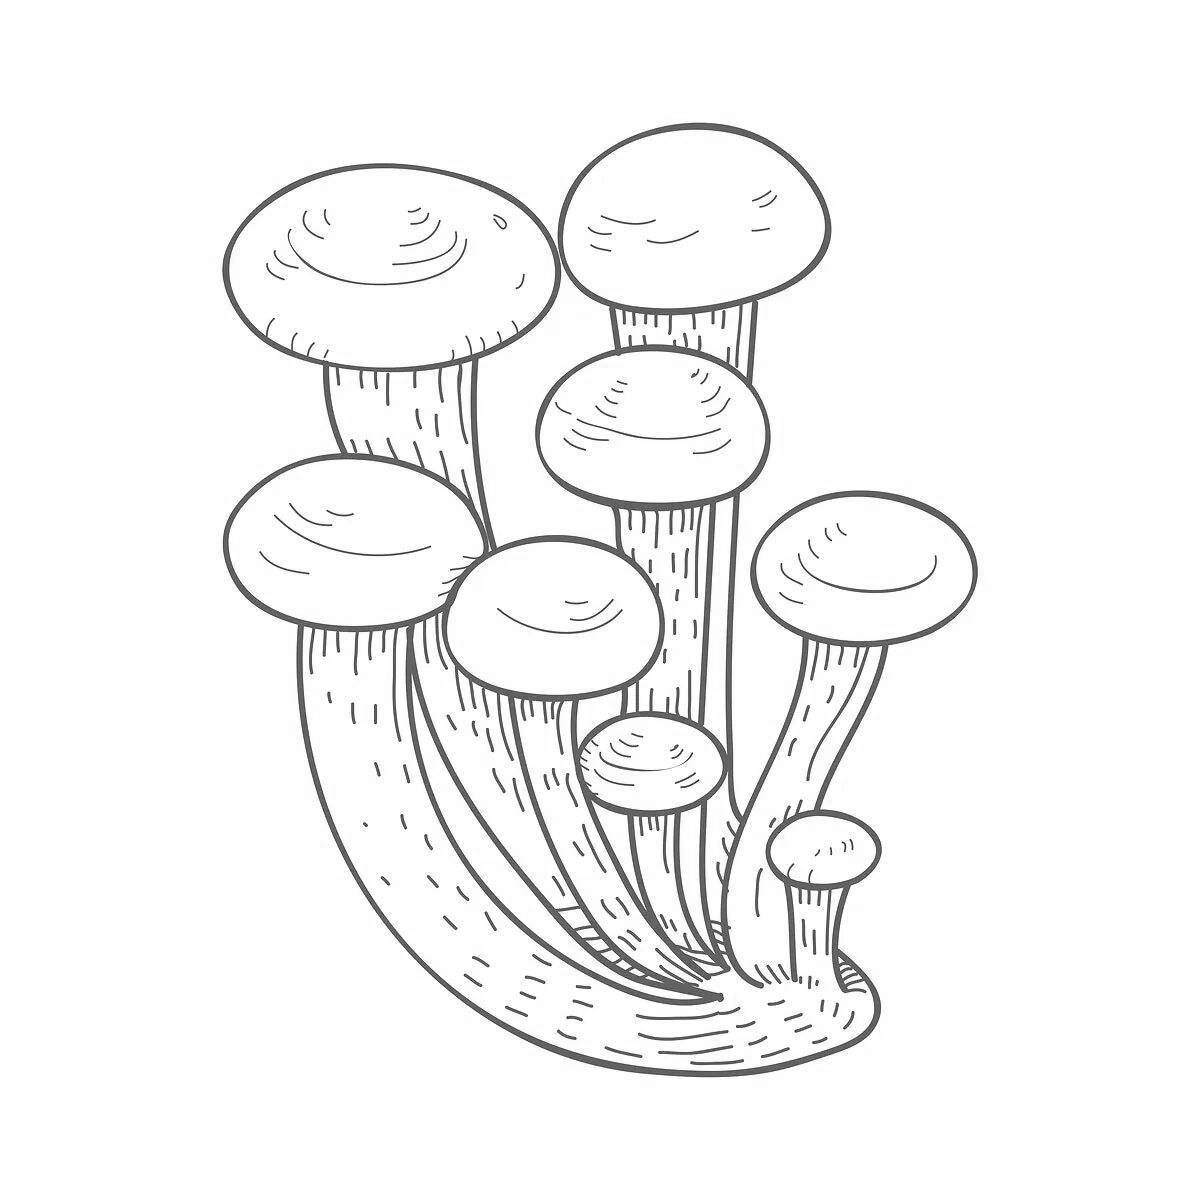 Sparkly mushrooms false coloring page